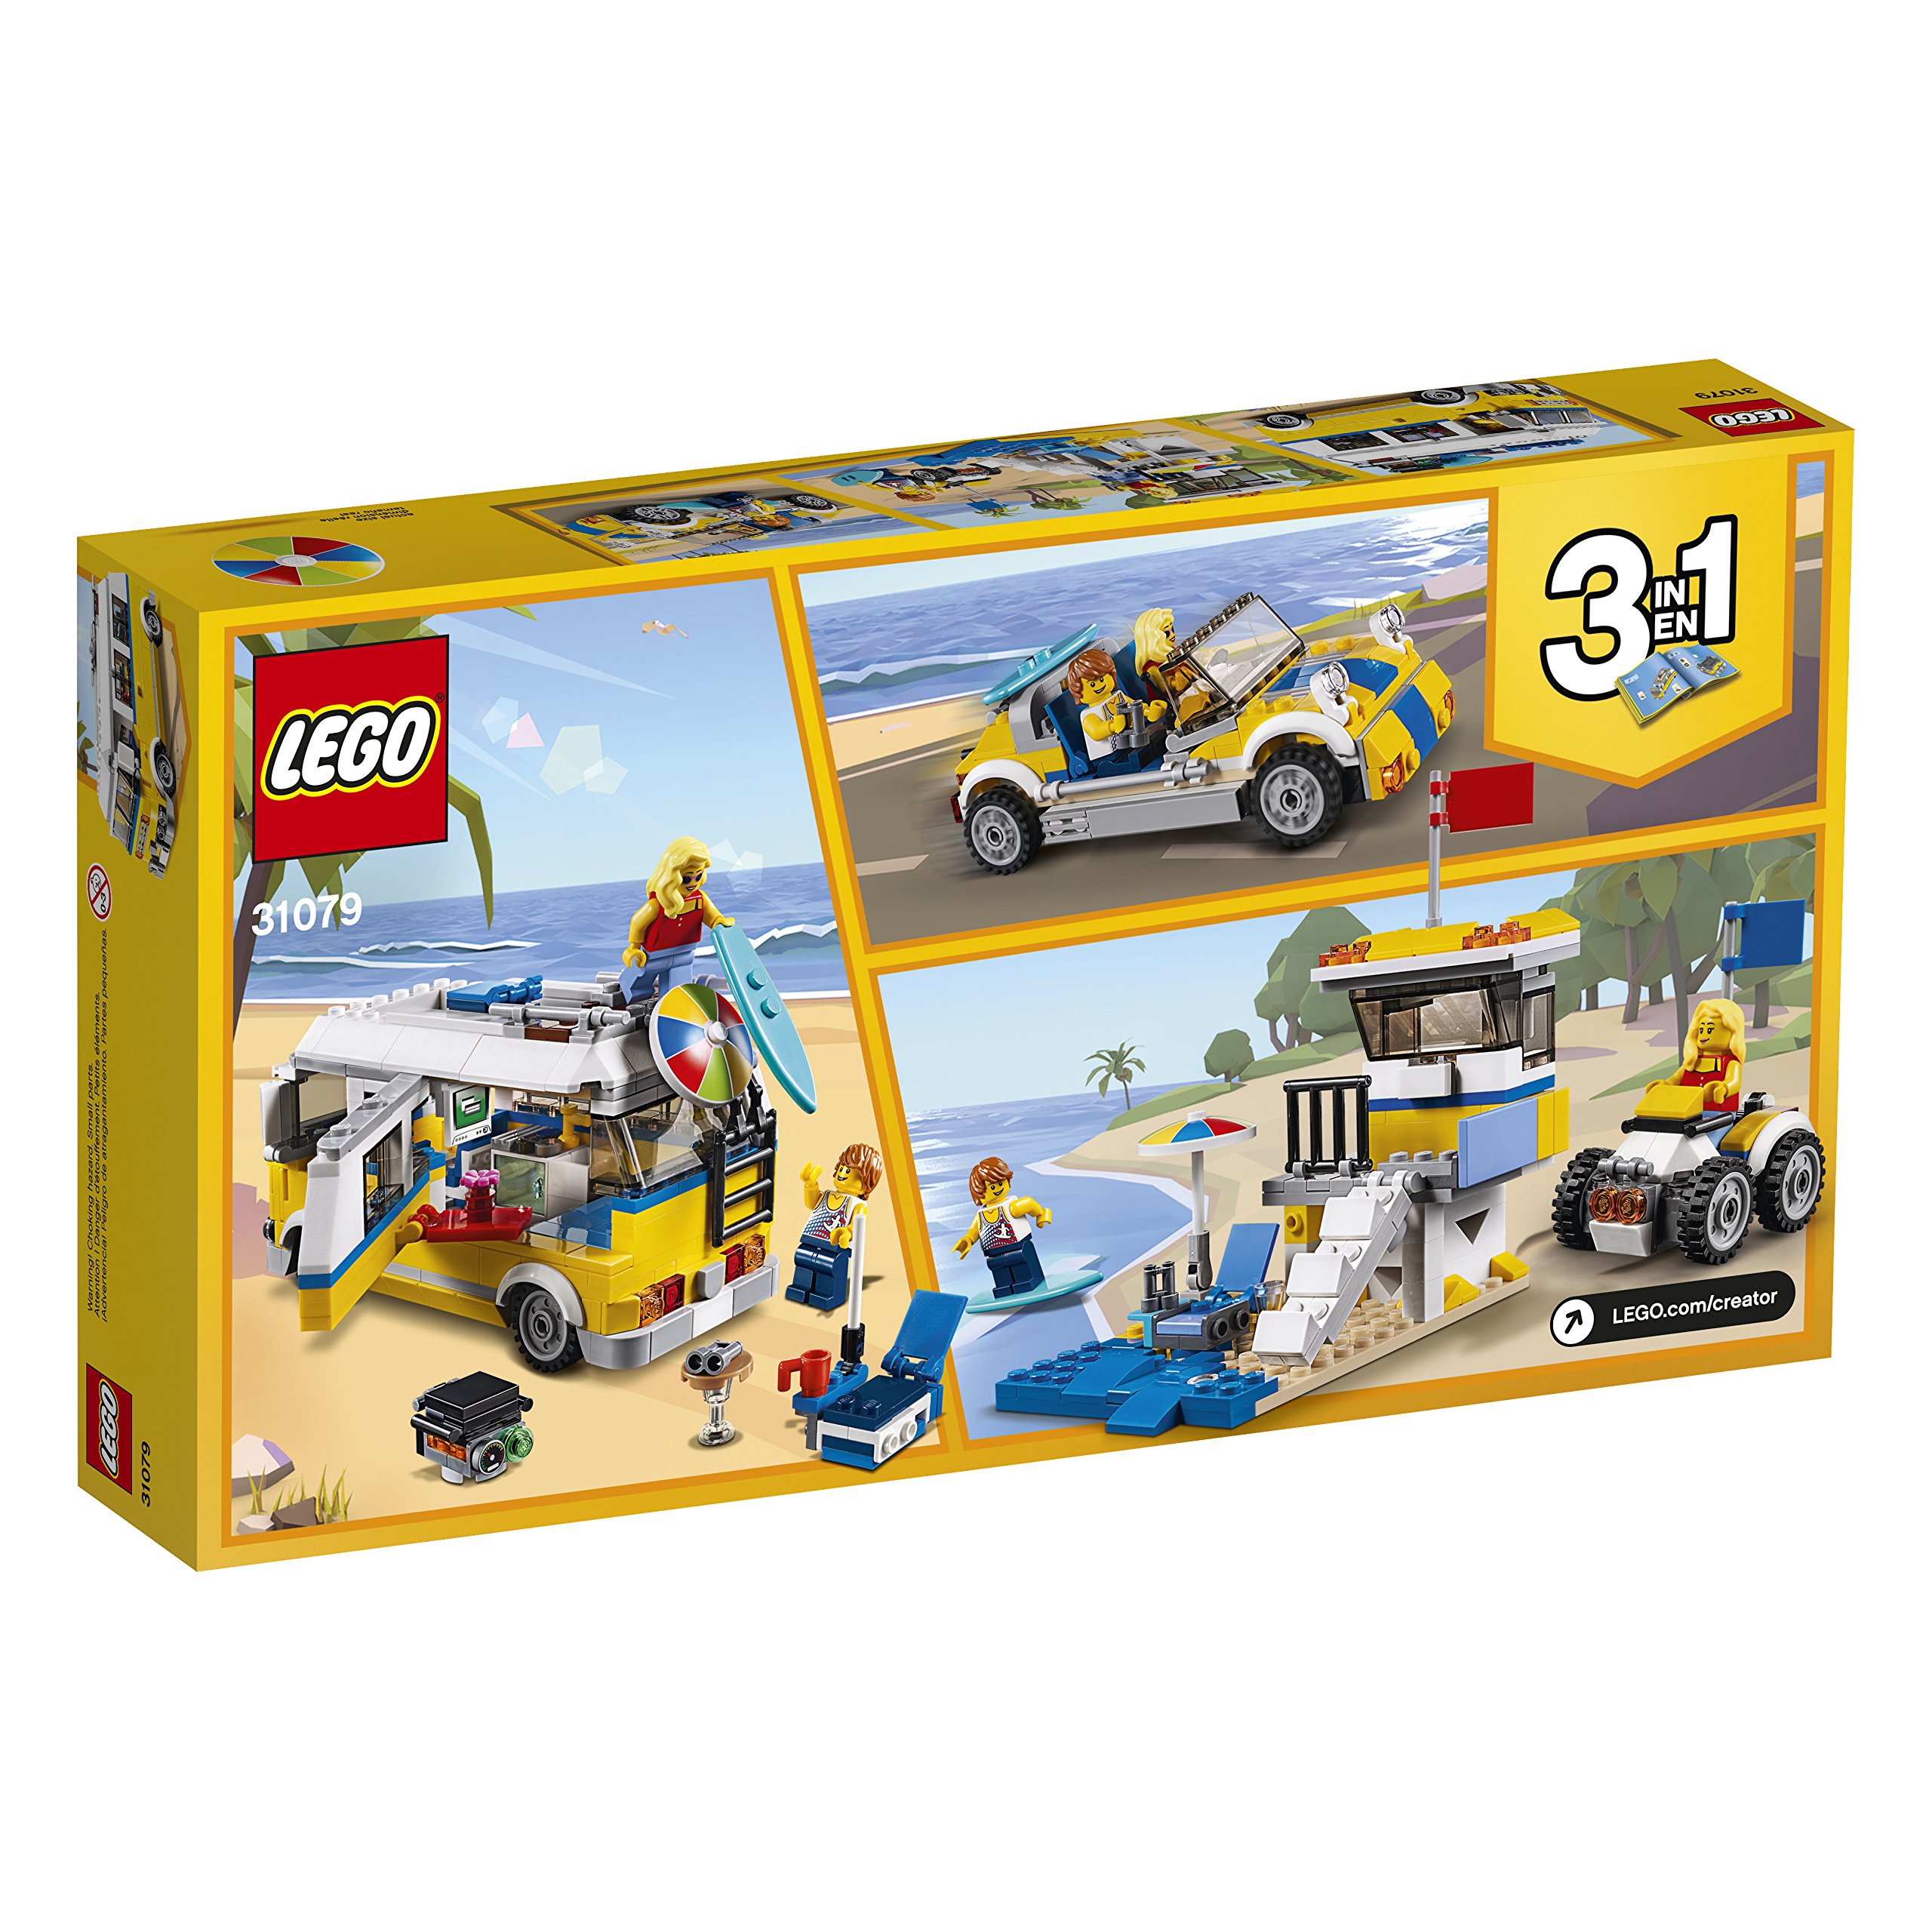 LEGO Creator 3in1 Sunshine Surfer Van 31079 Building Kit (379 Pieces) (Discontinued by Manufacturer)